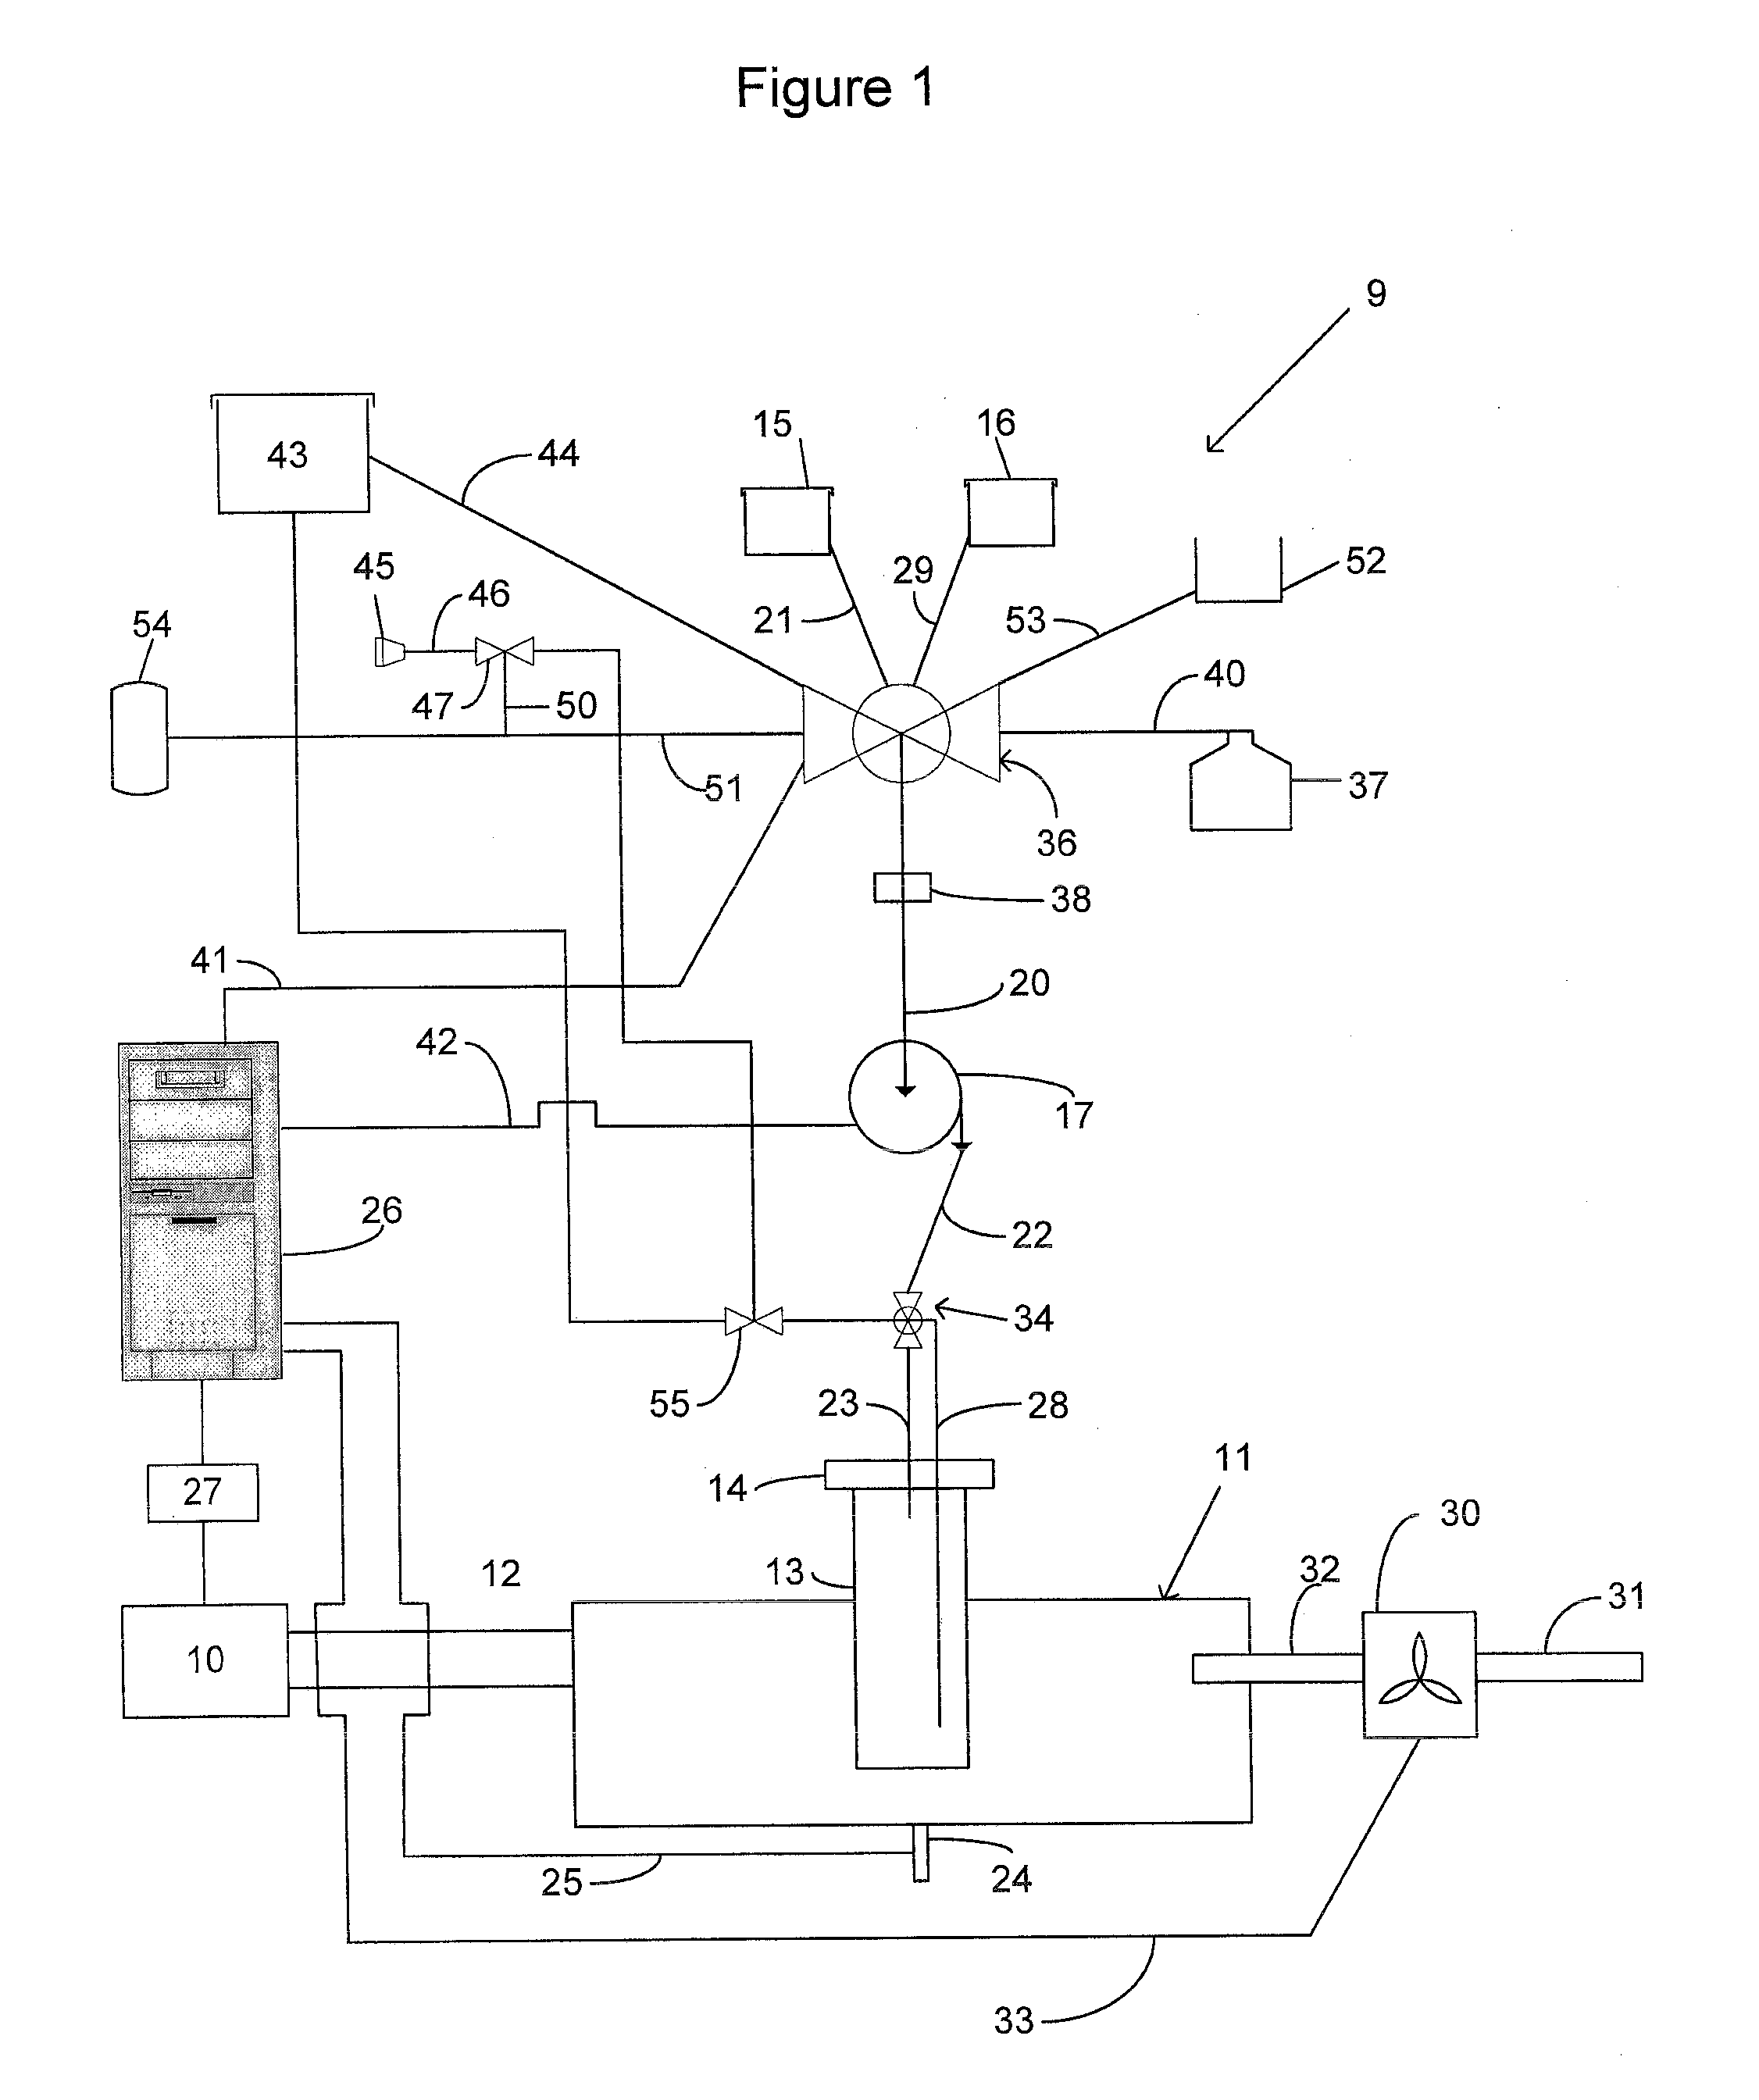 Controlled Flow Instrument For Microwave Assisted Chemistry With High Viscosity Liquids And Heterogeneous Mixtures